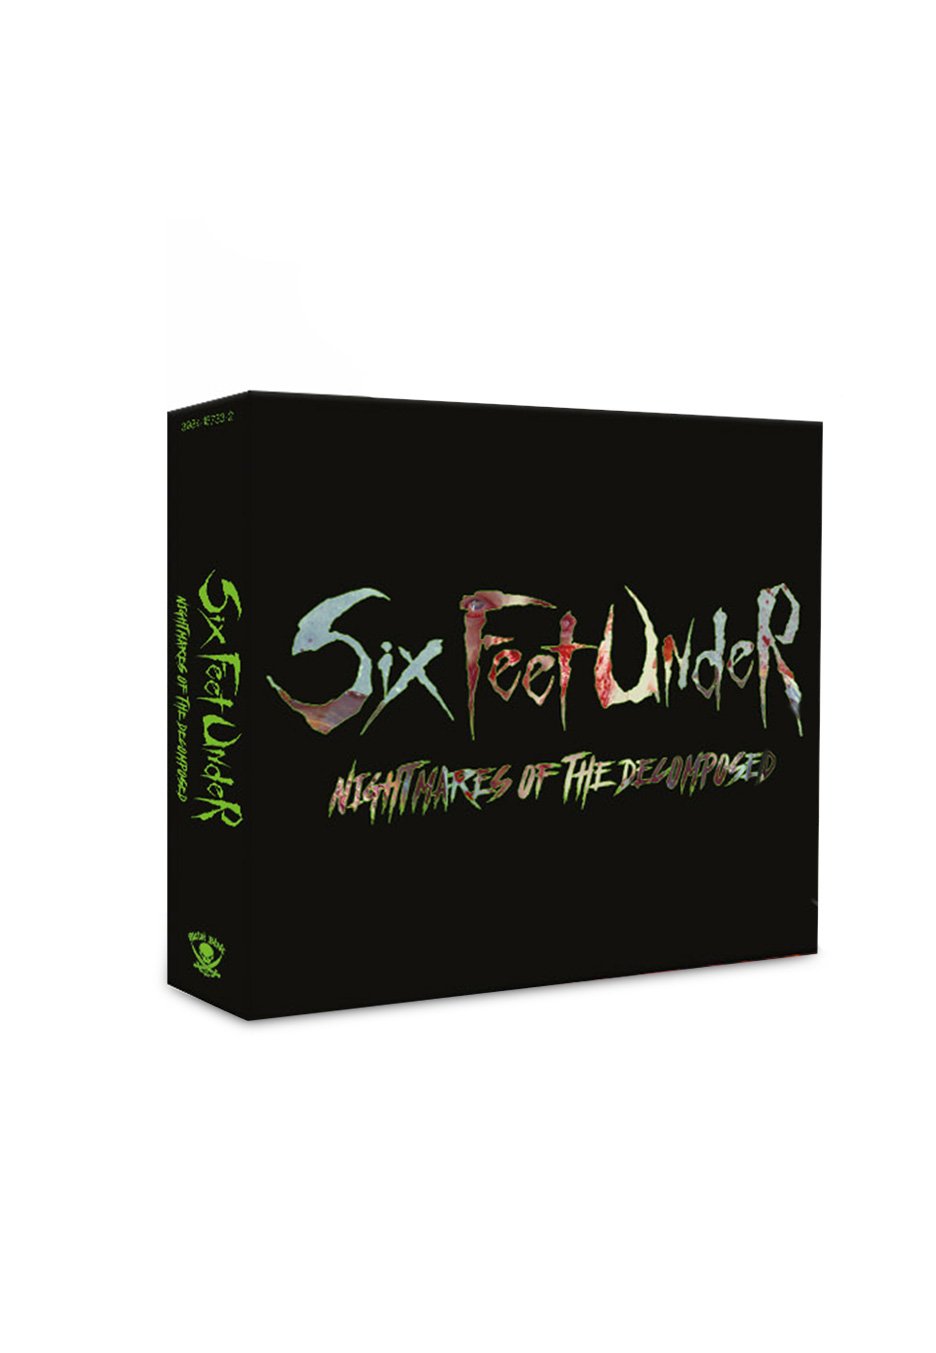 Six Feet Under - Nightmares Of The Decomposed - Box